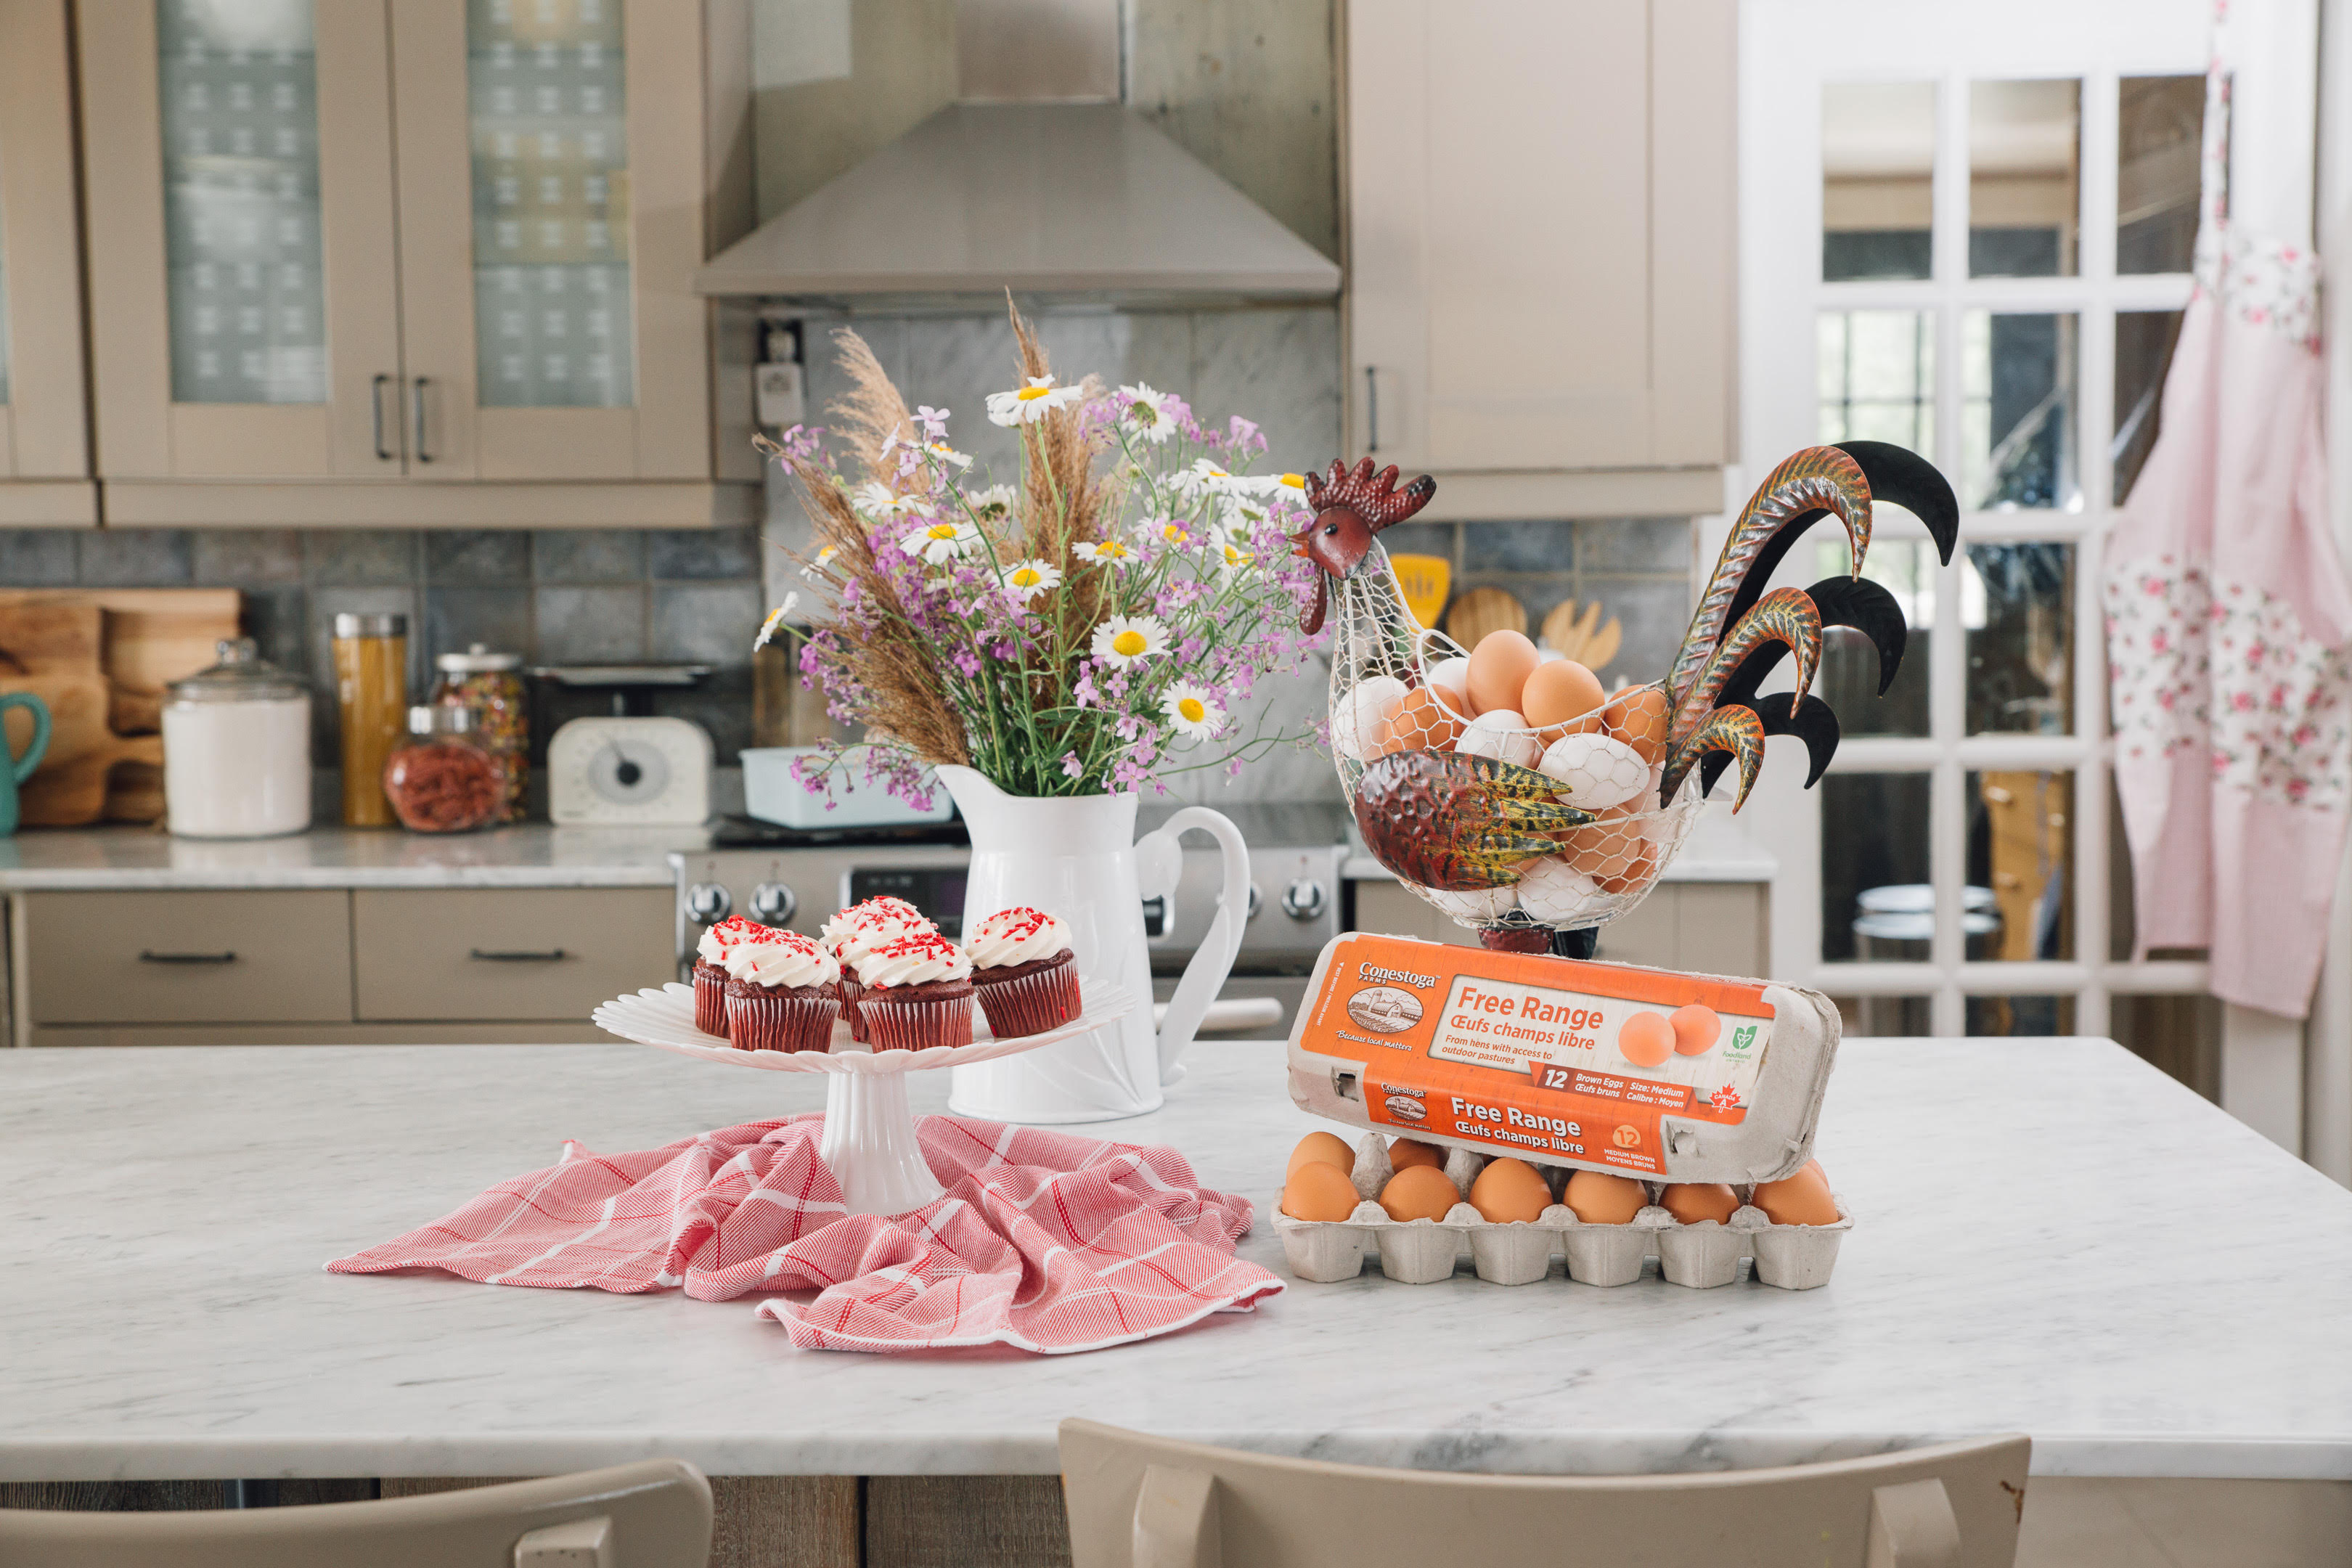 Conestoga Farms Free Range Eggs in a kitchen with baked cupcakes